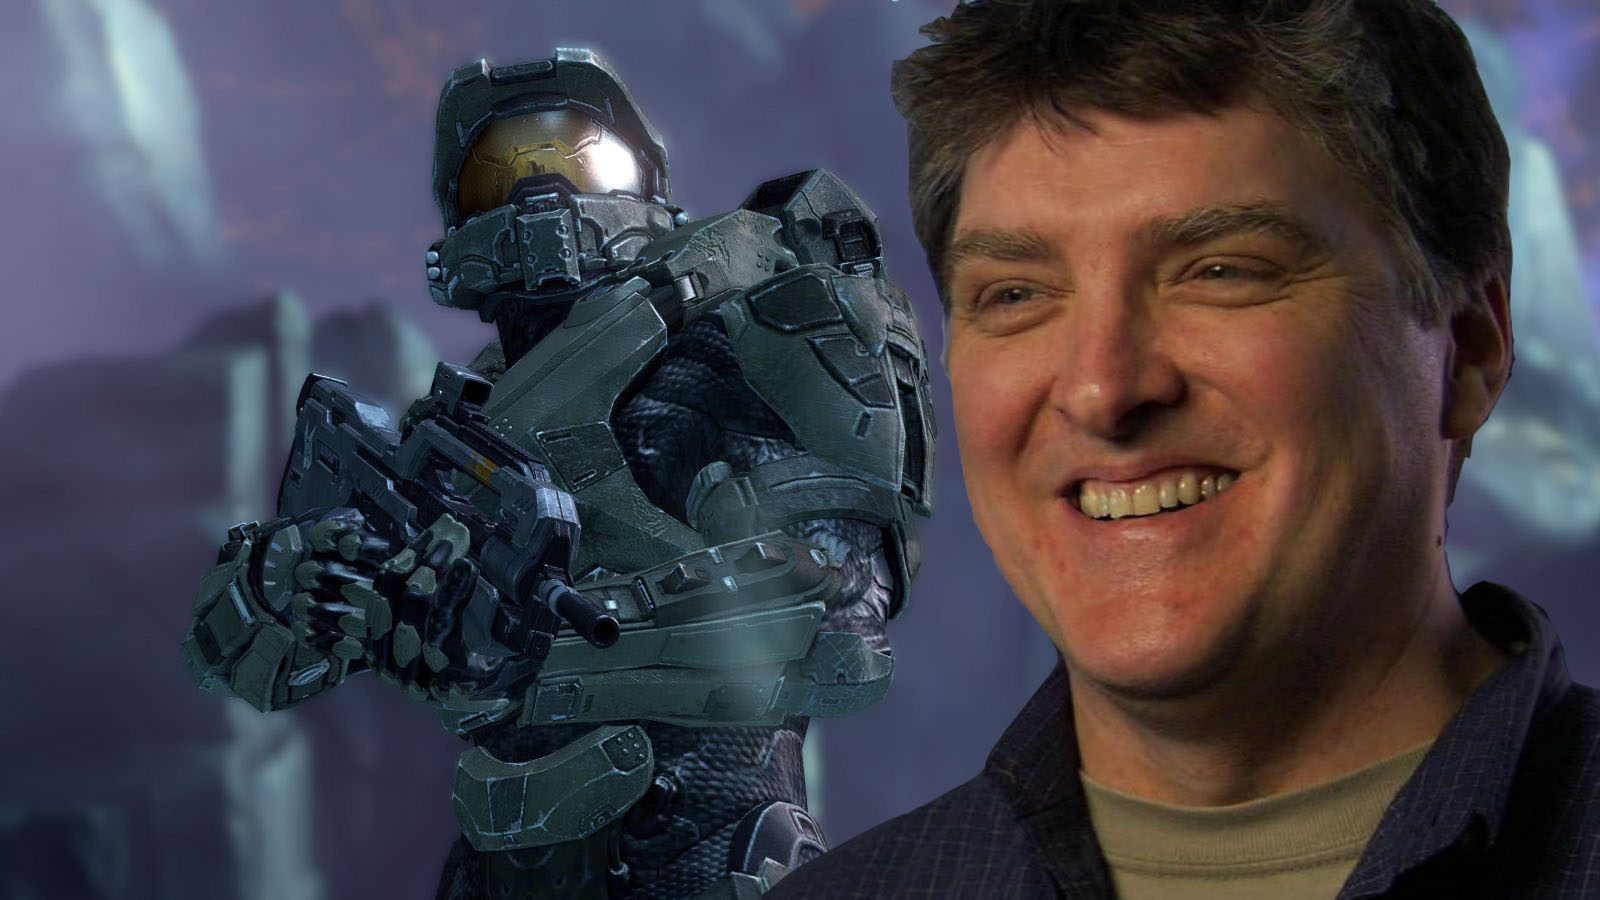 Marty O'Donnell Bungie compositor